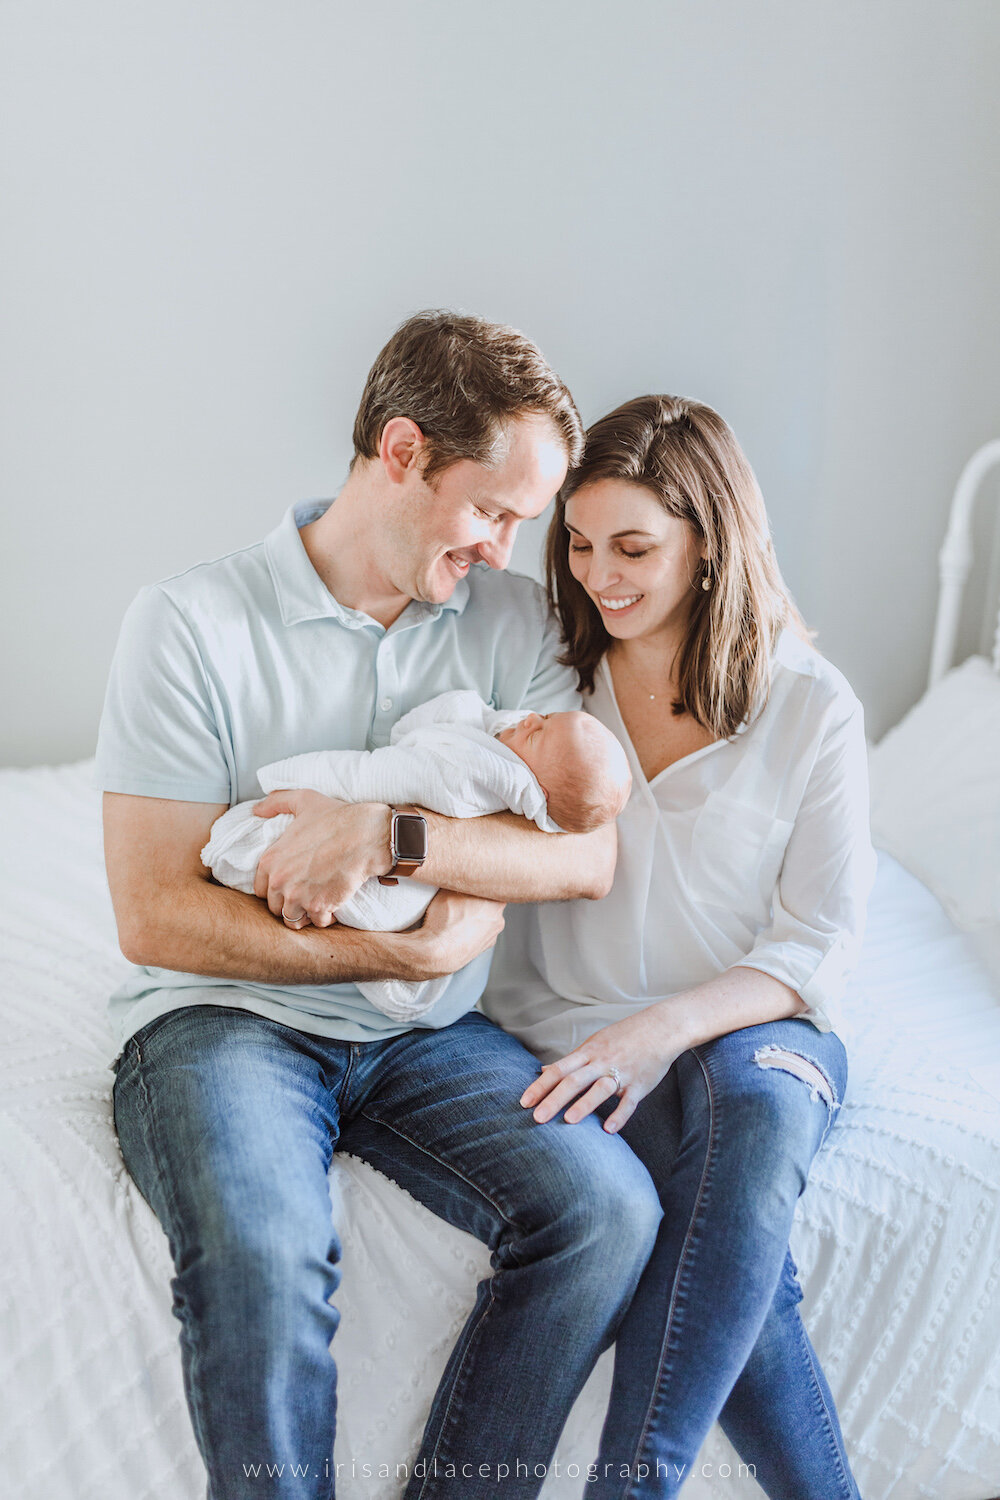 at-home newborn photography session in Silicon Valley